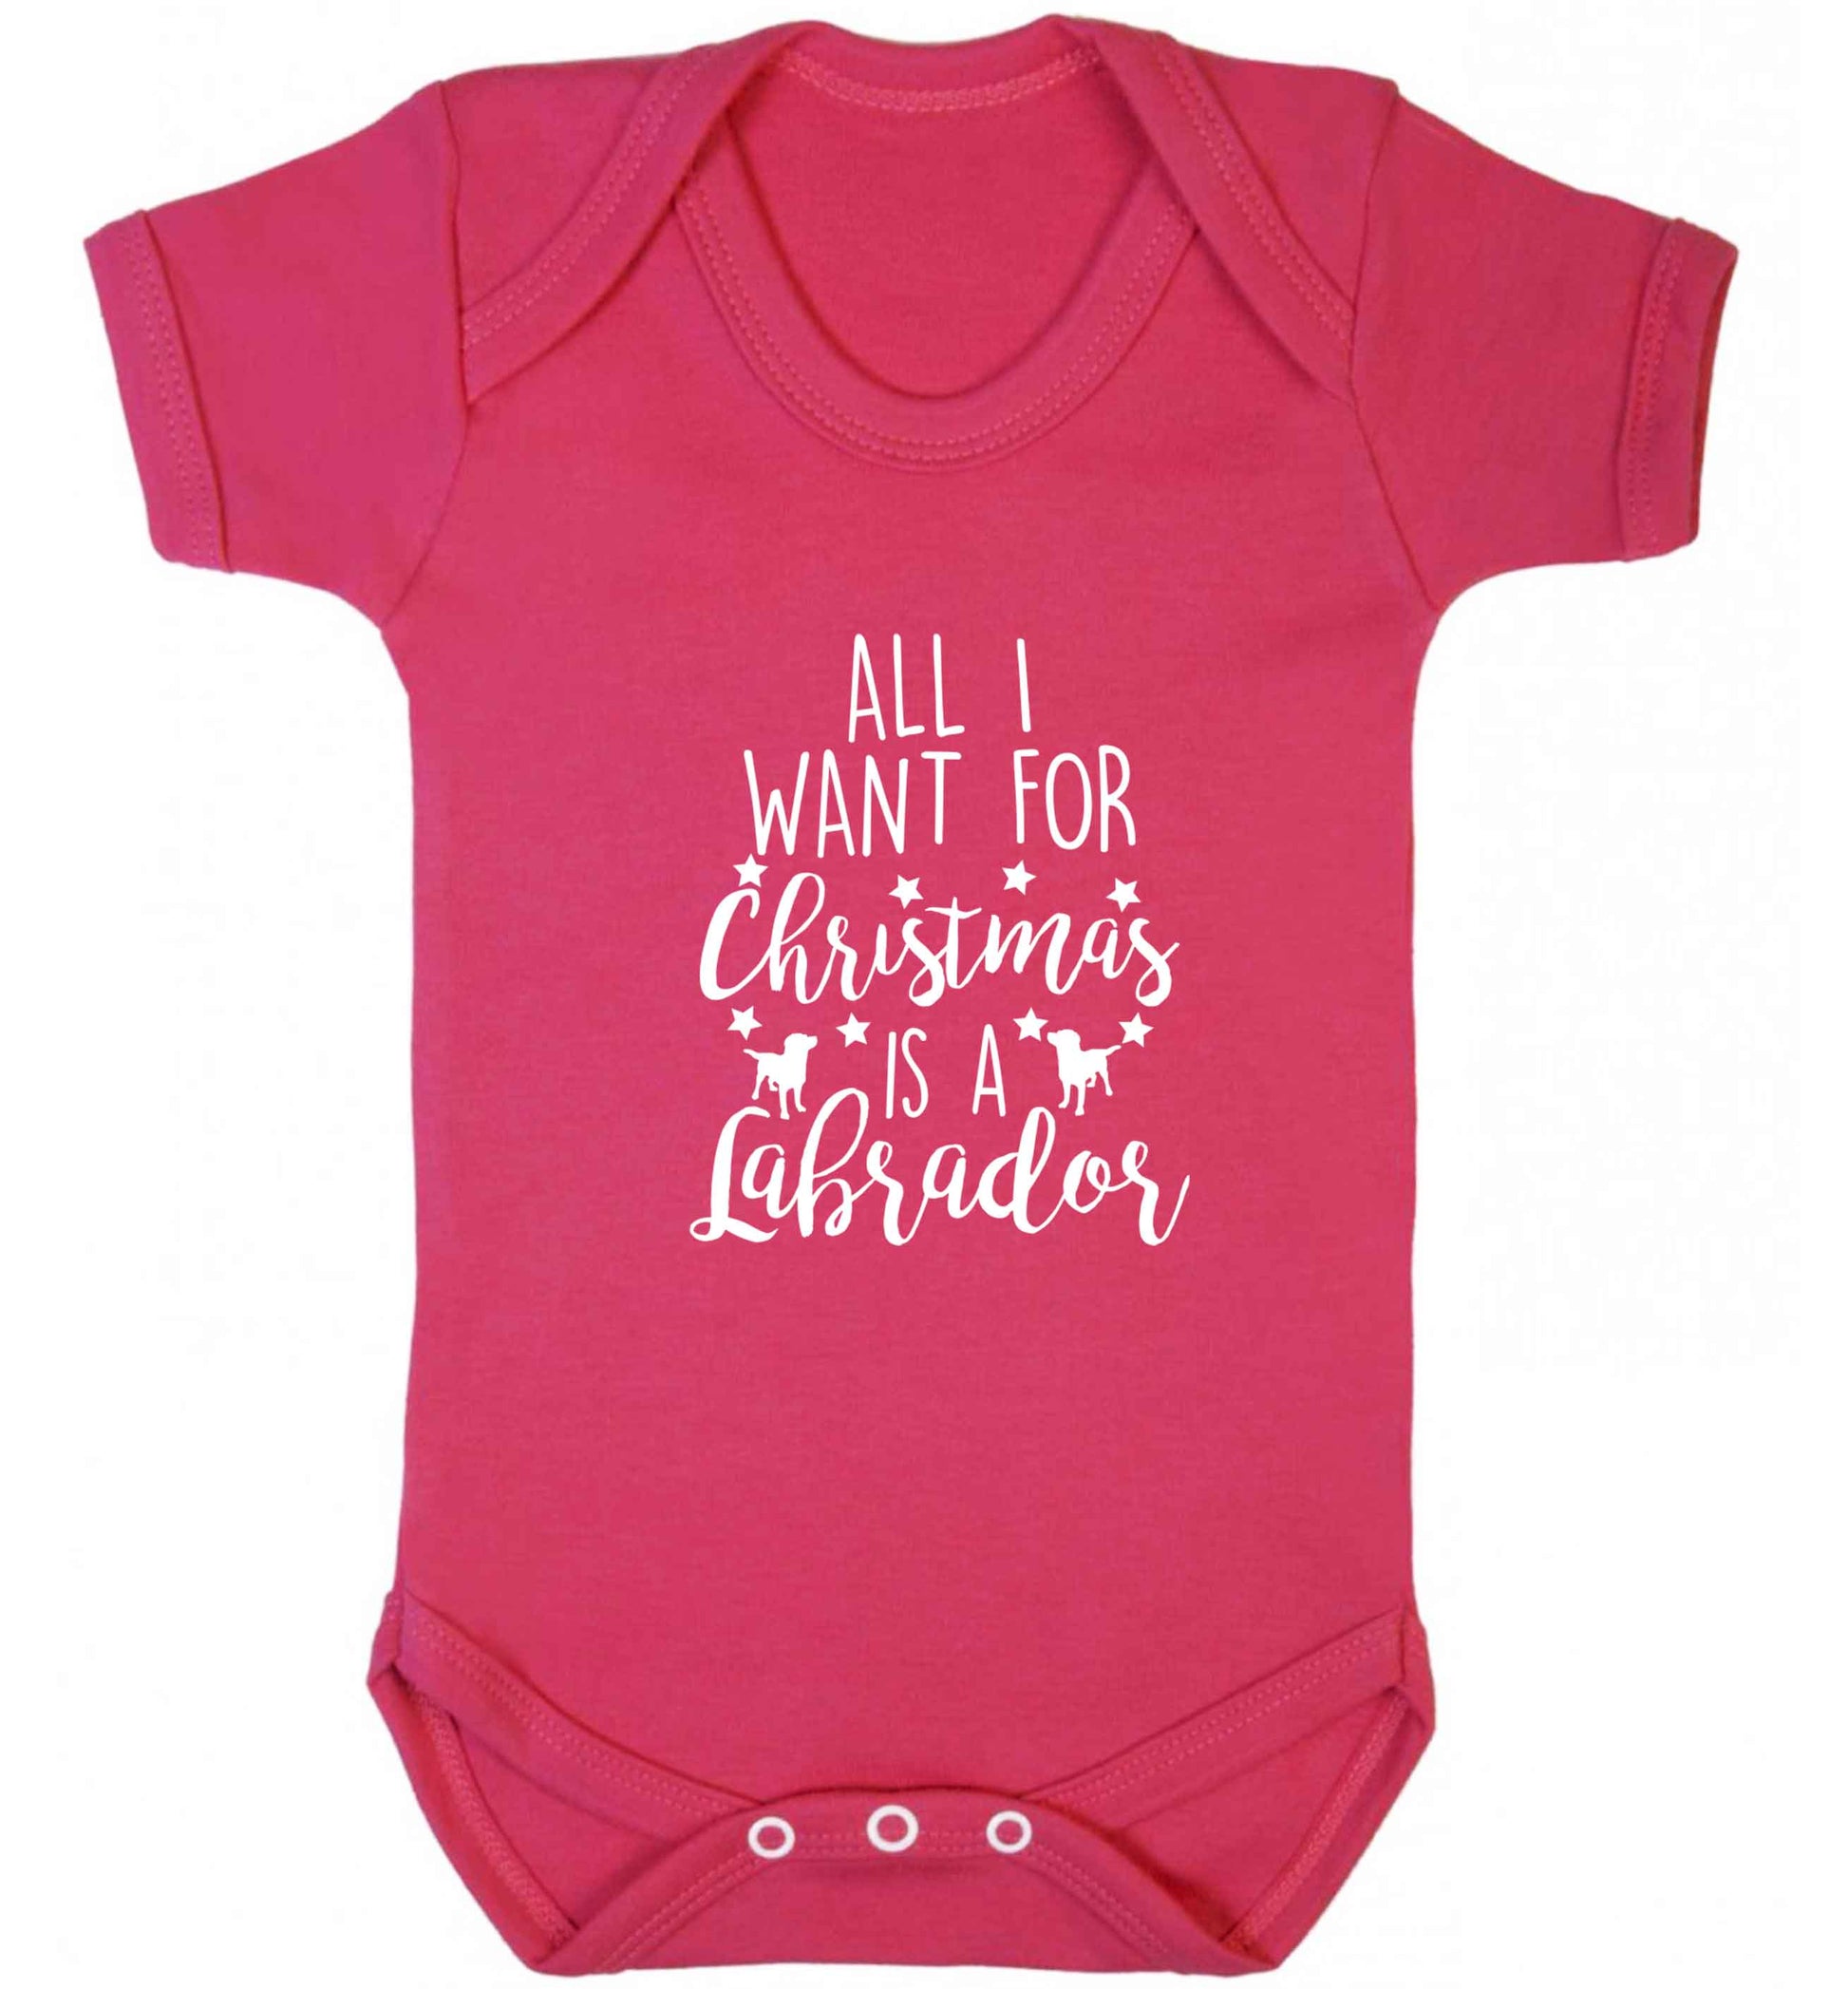 All I want for Christmas is a labrador baby vest dark pink 18-24 months